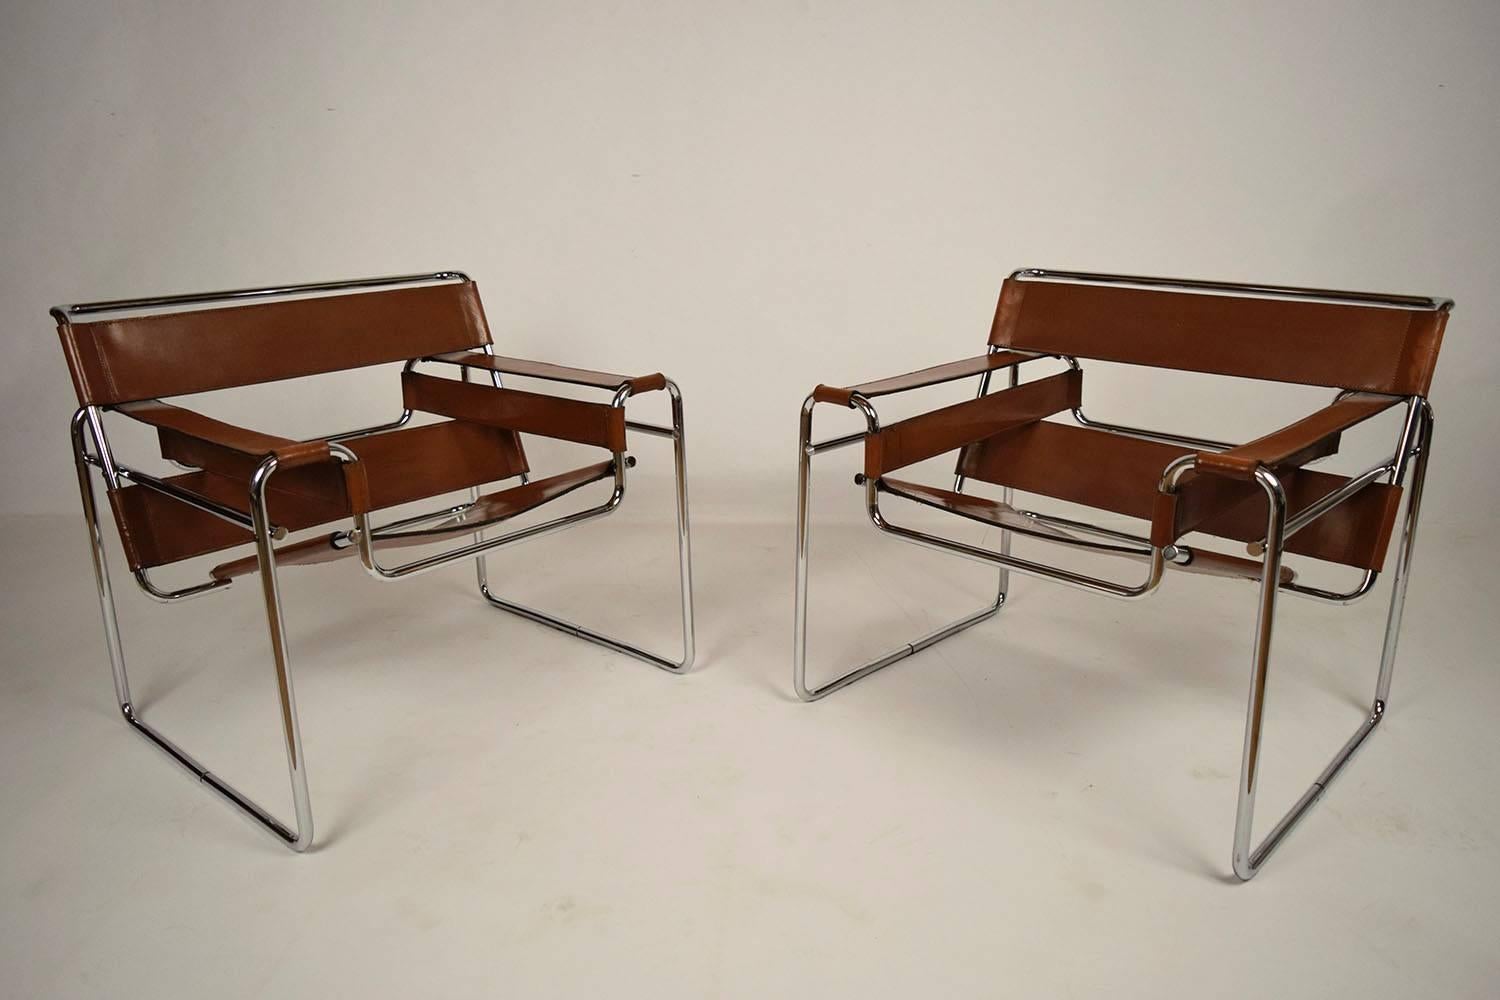 This pair of 1970's vintage Wassily chairs were designed by Marcel Breuer. The chairs feature a uniquely shaped chrome frame that compliments the tan leather seat. The leather seat is in its original color and will compliment any home decor. These